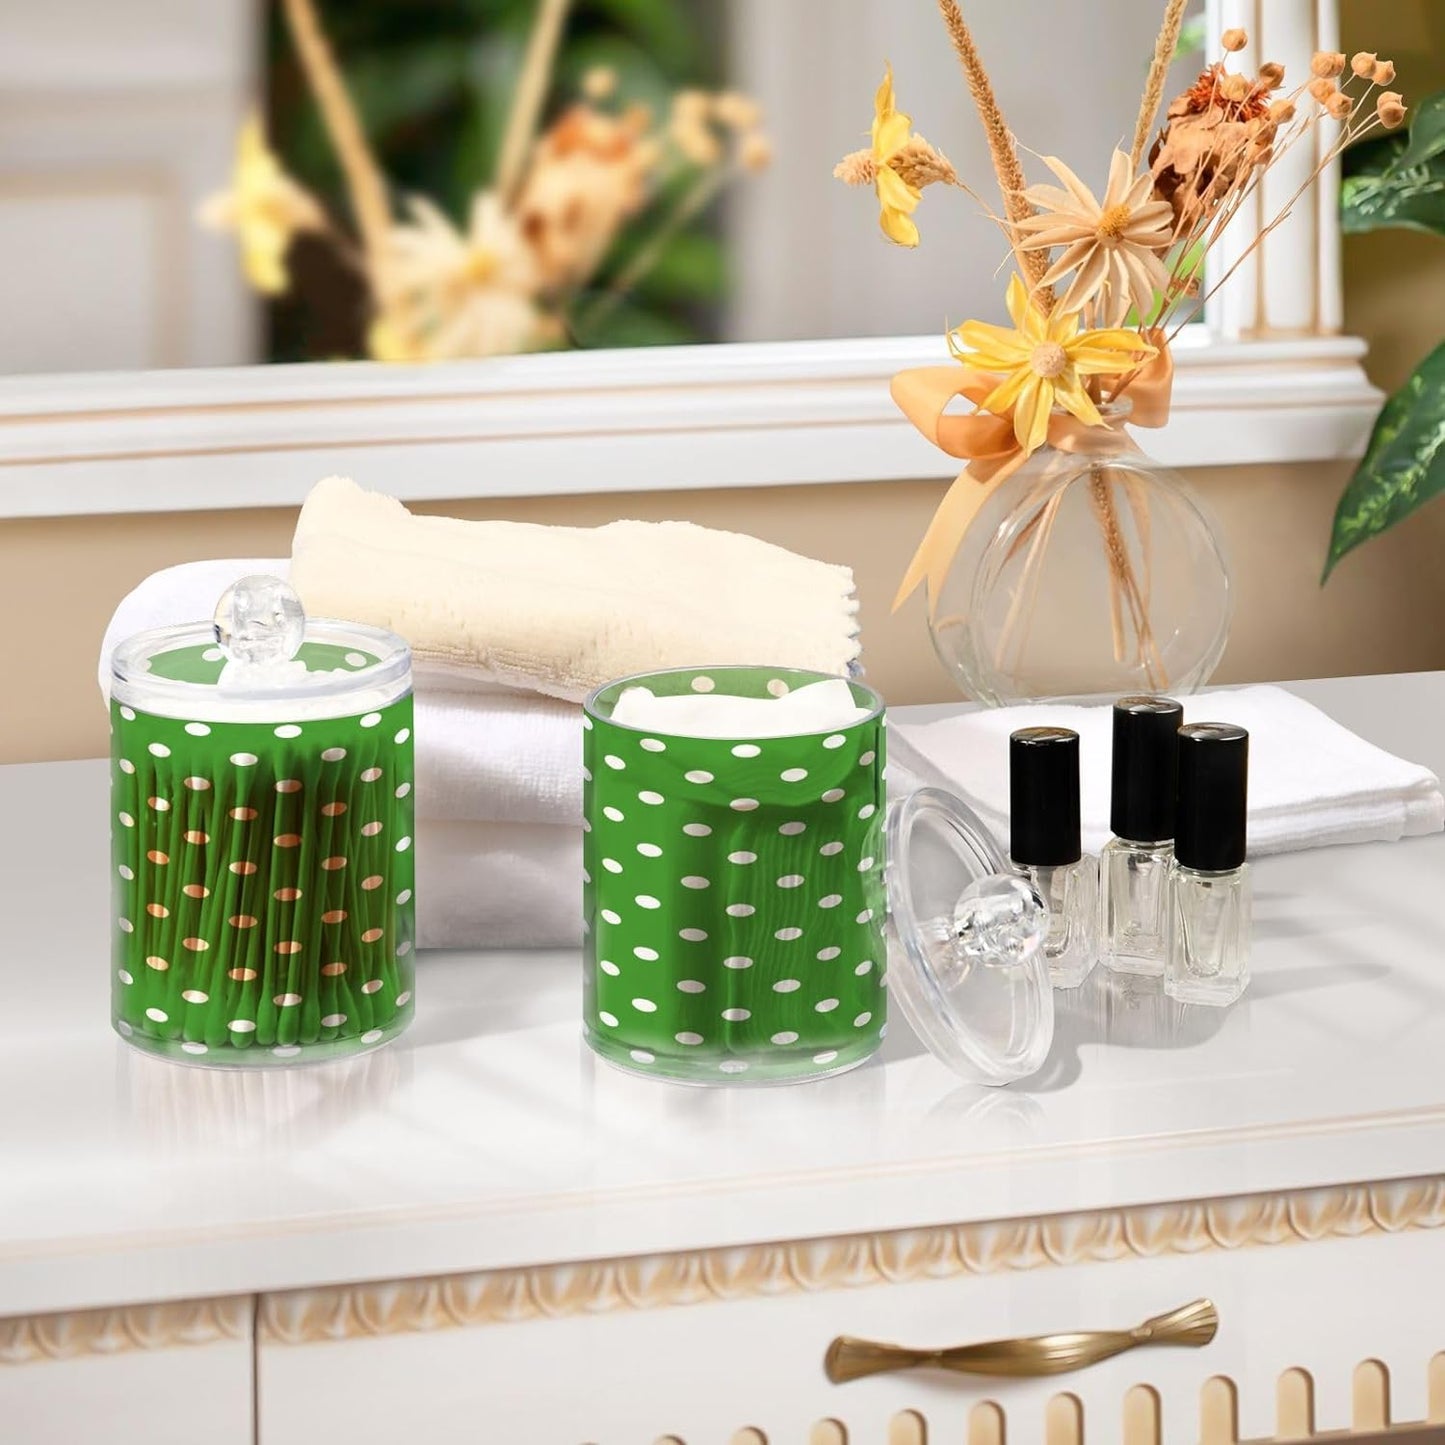 FLildon Green Polka Dot Qtip Holder Dispenser, Bathroom Organizer and Storage Containers, 4Pack Clear Plastic Apothecary Jars with Lids for Cotton Ball, Cotton Swab, Floss